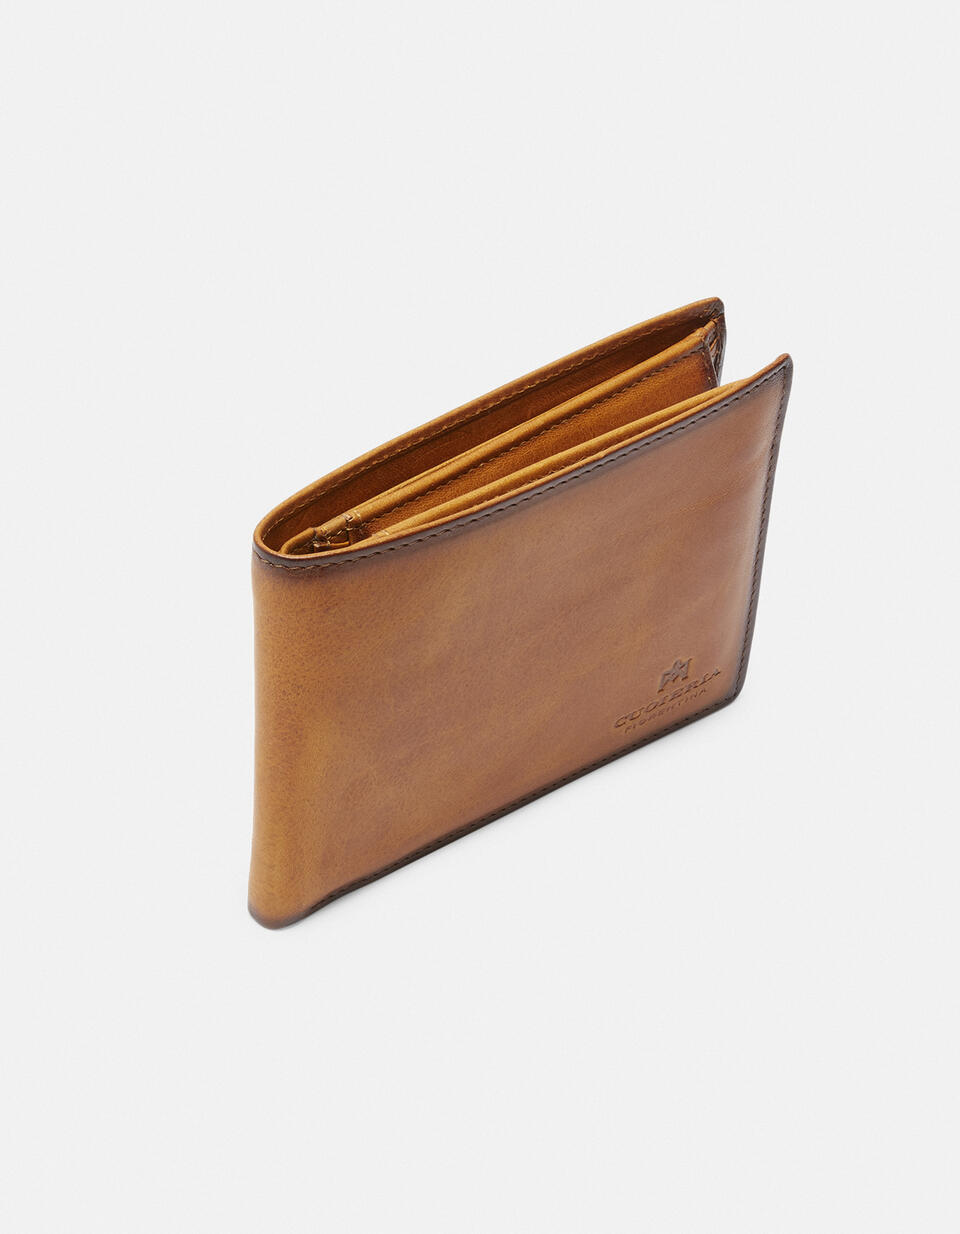 Anti-rfid Warm and Color wallet with leather coin case - Women's Wallets - Men's Wallets | Wallets  - Women's Wallets - Men's Wallets | WalletsCuoieria Fiorentina